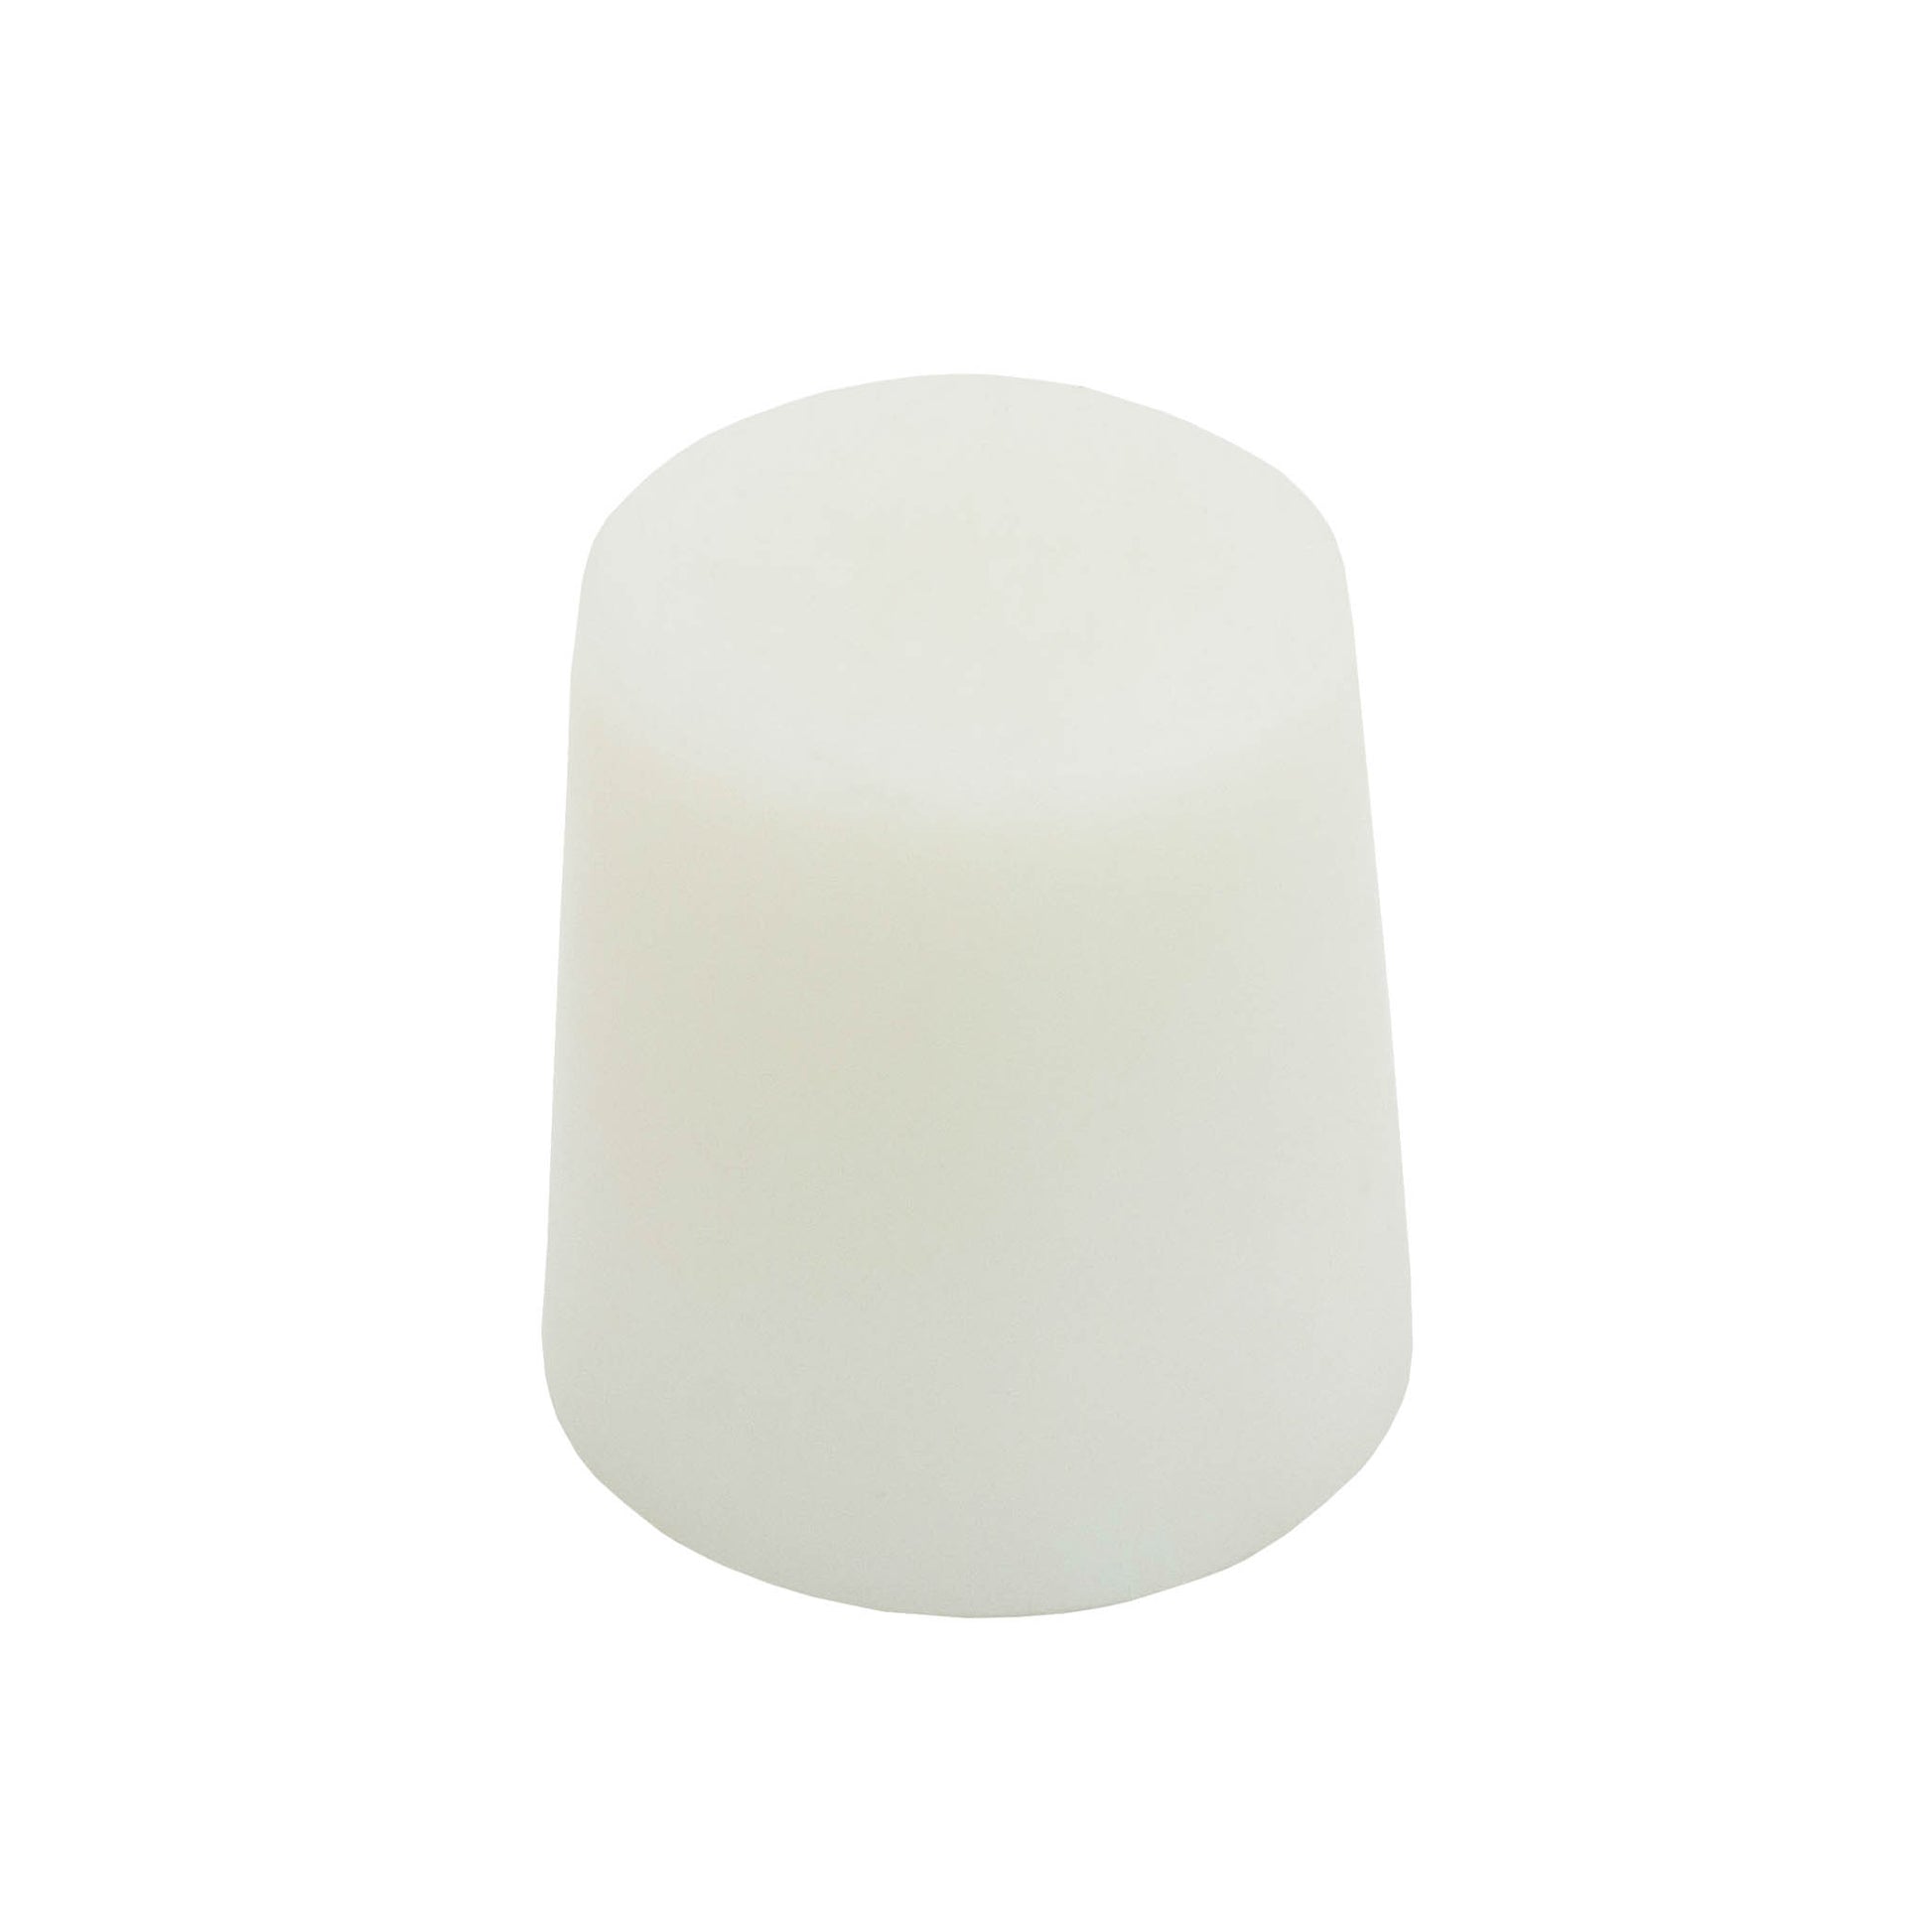 25-33mm silicone bung used in wine, beer and cider making, and fermenting.